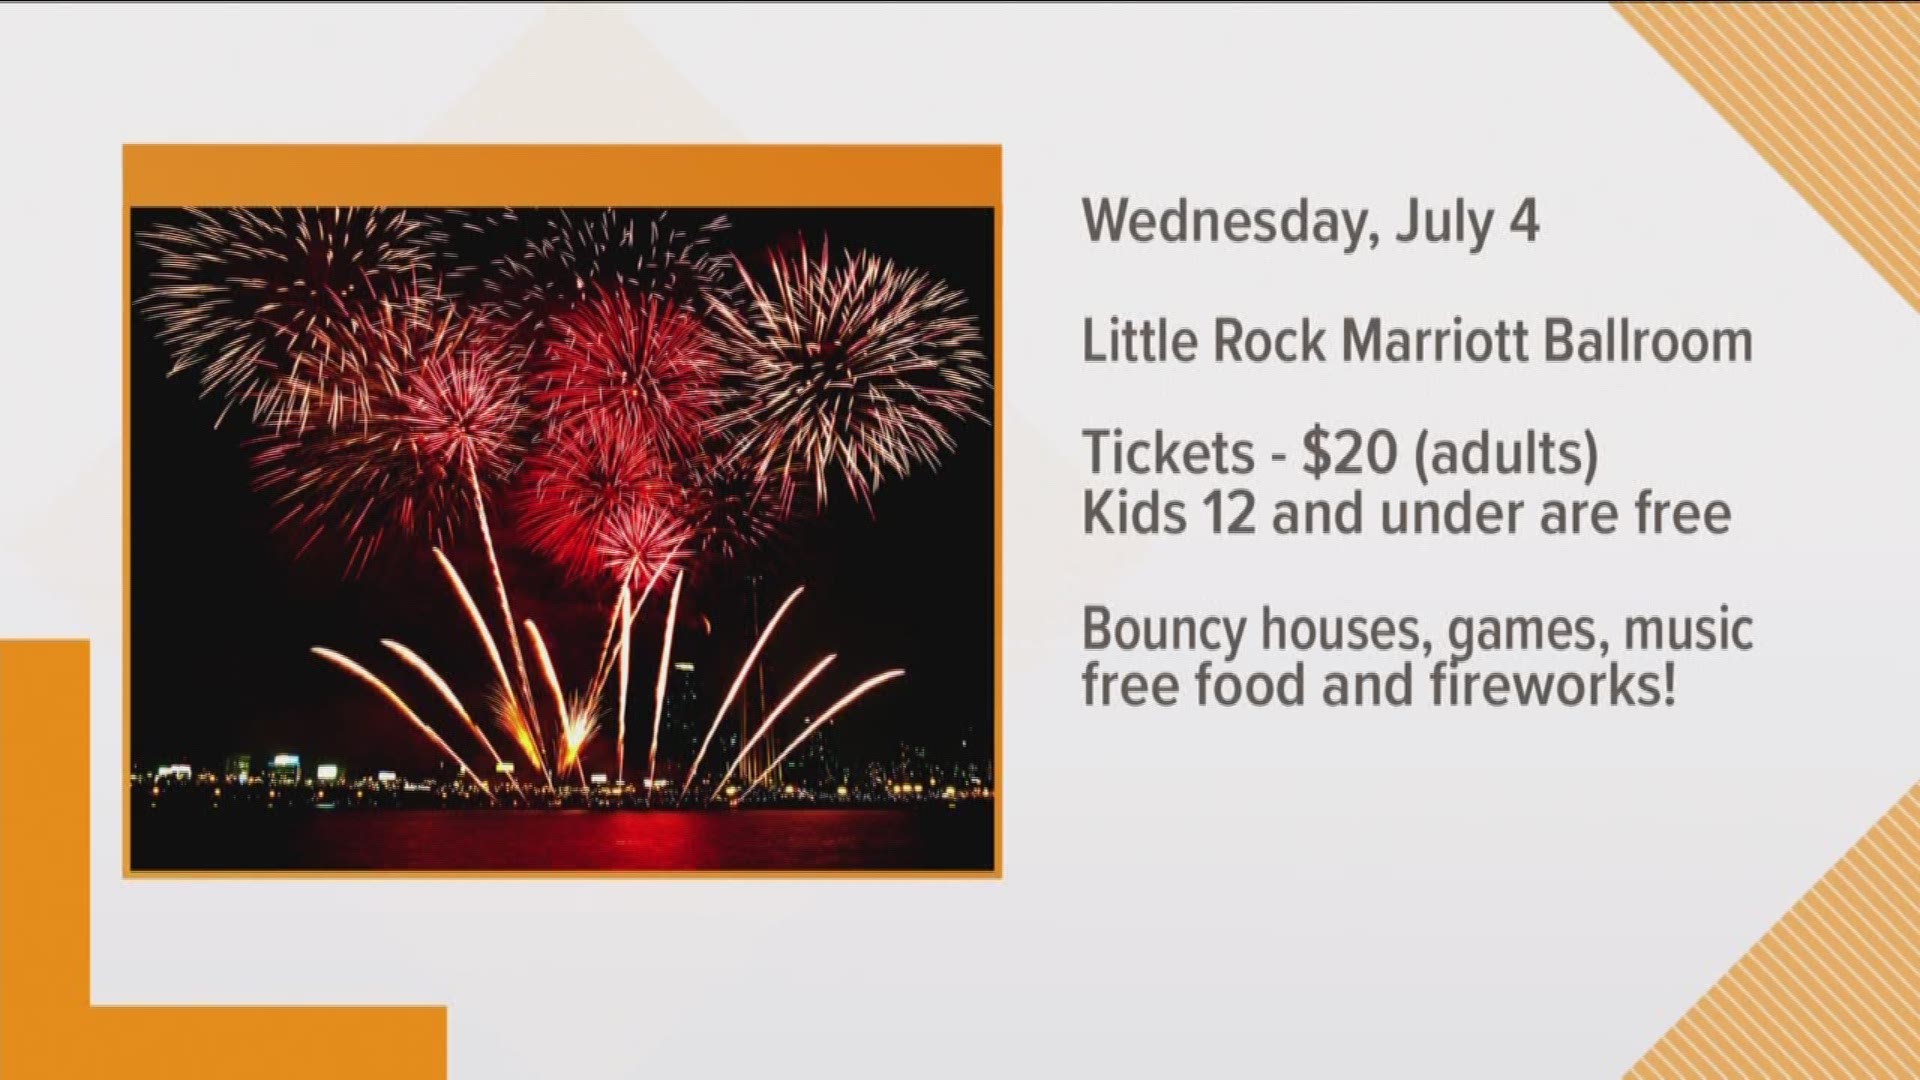 Bouncy houses, games, music, free food and fireworks are all on tap for the July 4 fireworks watch party at the Little Rock Marriott Ballroom.